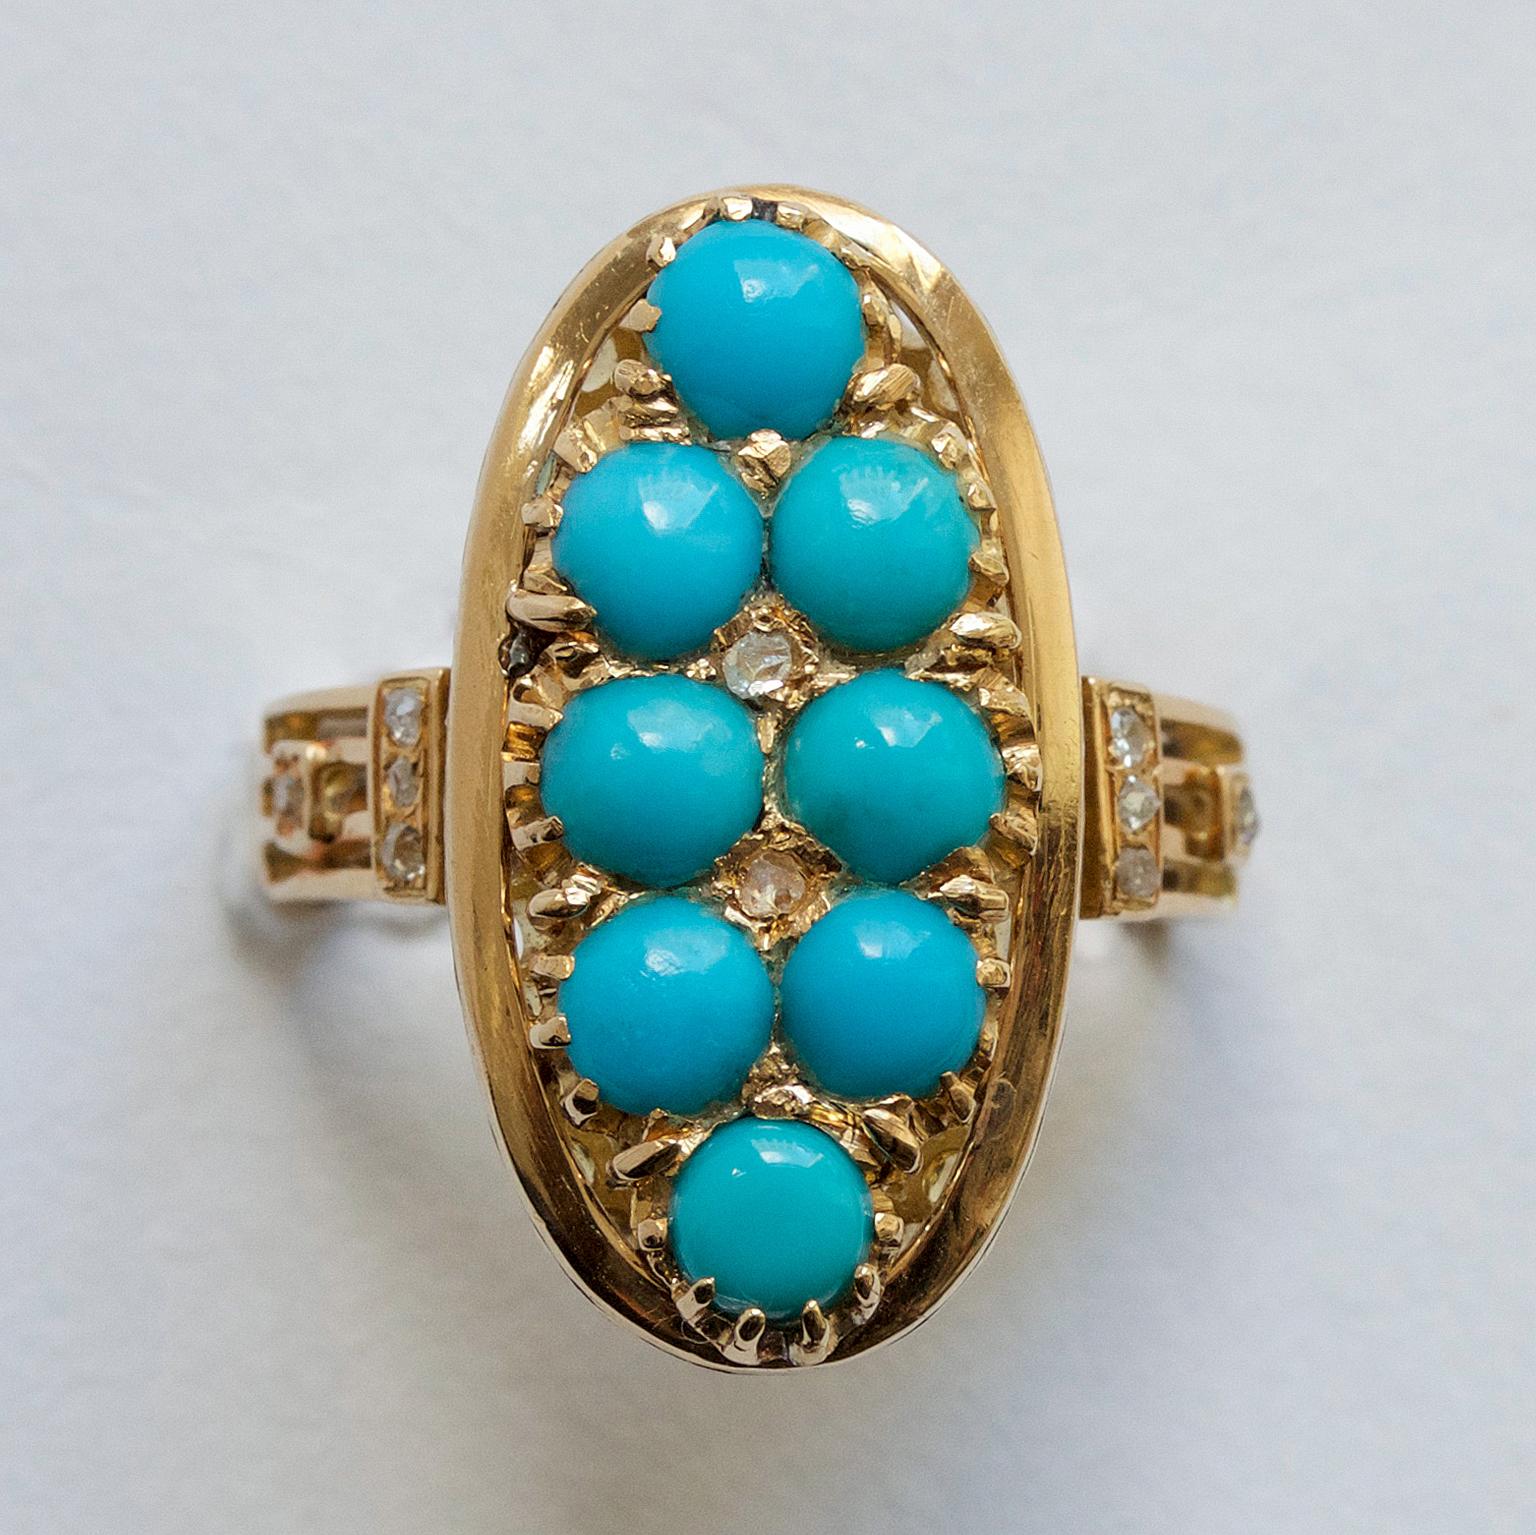 A ring with a large 18 carat yellow gold oval element set with eight cabochon cut turquoises and with six rose cut diamonds in between the turquoises and on the side of the shank, France, 19th century.

weight: 6.76 grams
width: 2.8 – 22 mm
ring